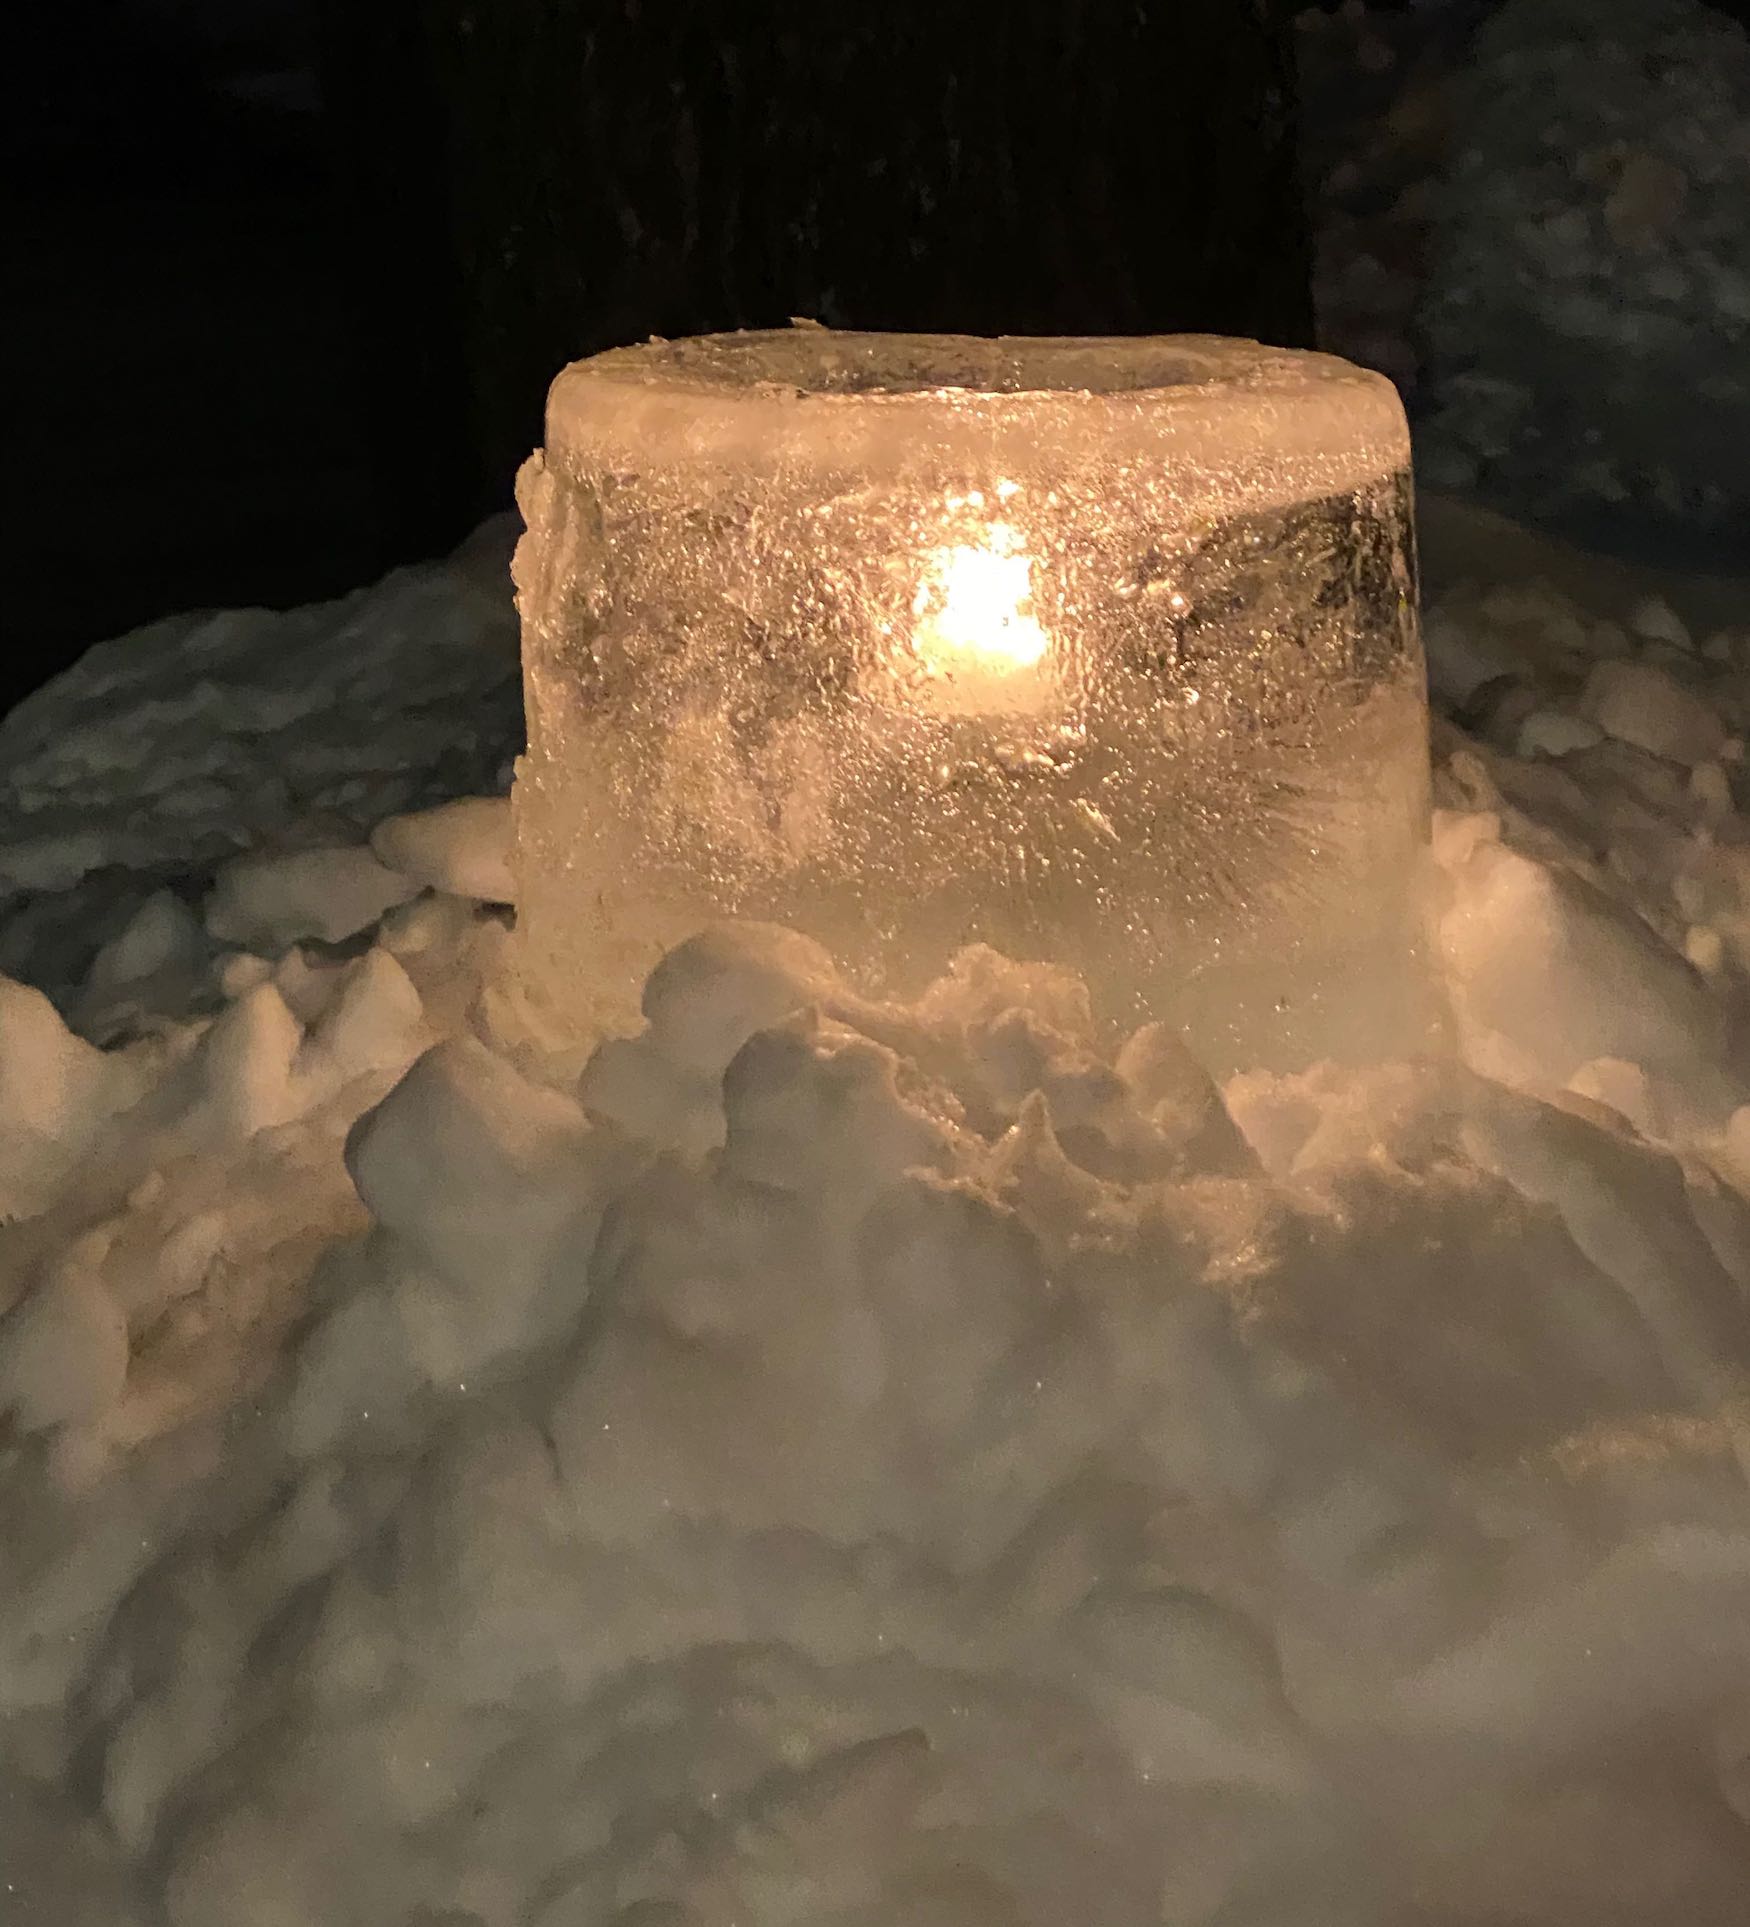 It's the weekend! Number 281, Candle in an Ice Holder on Top of the Snow